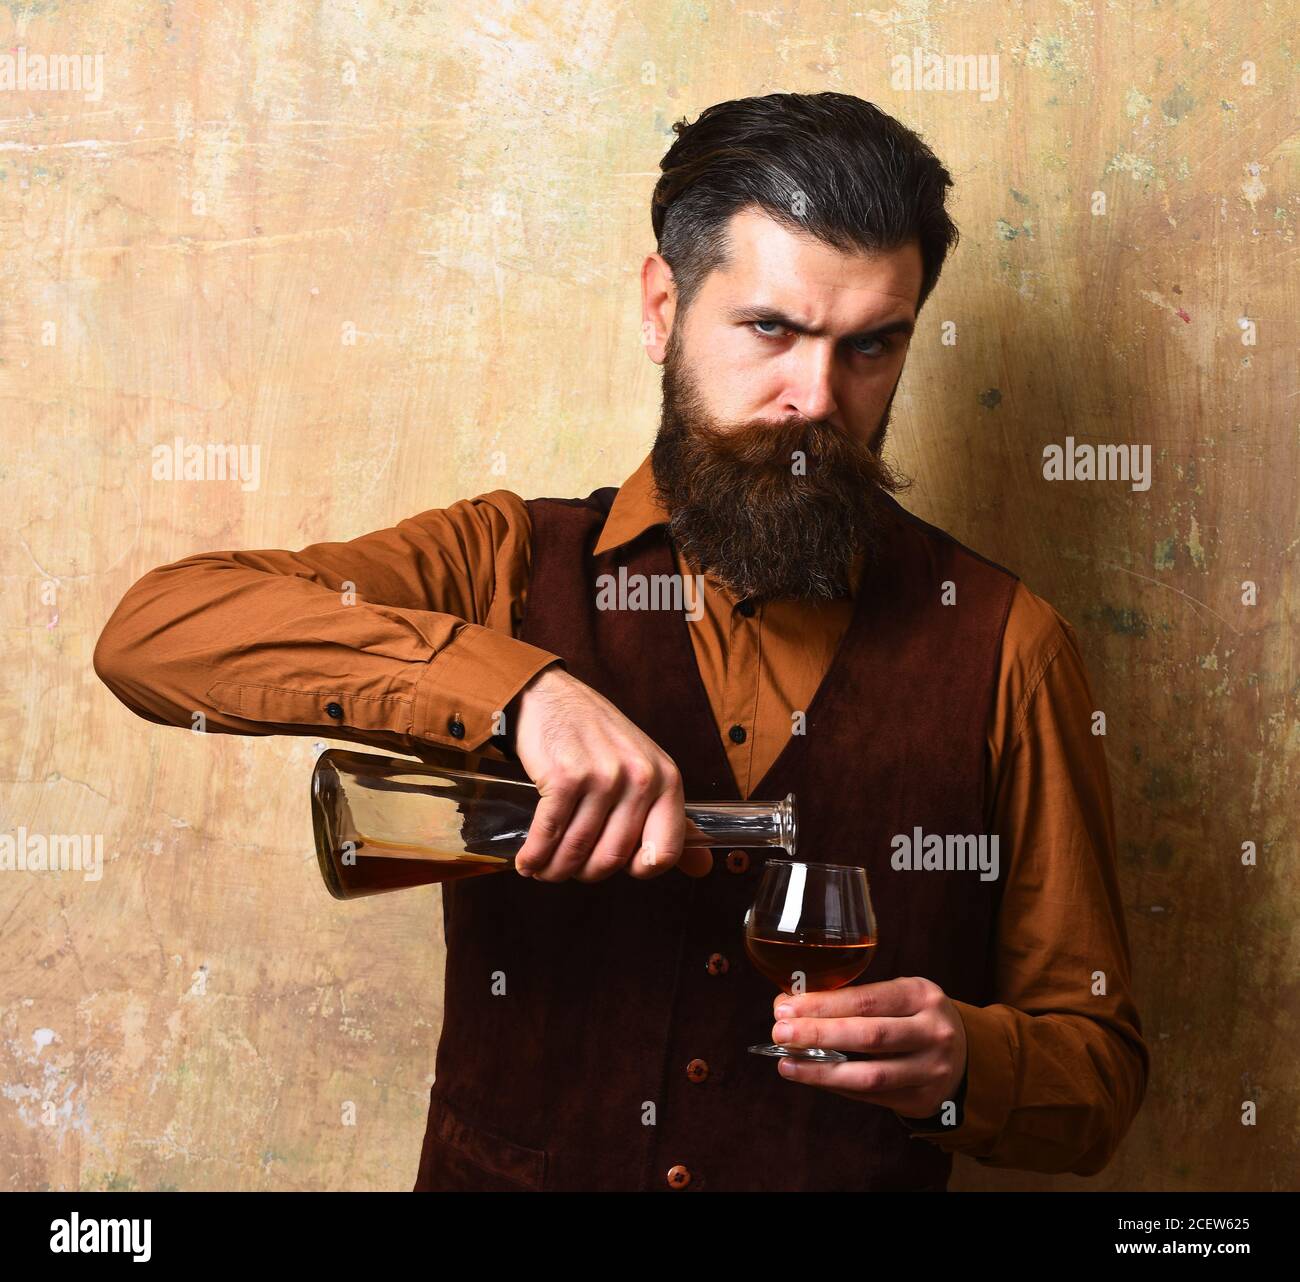 Guy pours cognac into glass from bottle. Man with beard and mustache holds alcoholic beverage on beige wall background. Service and catering concept. Macho with strict face drinks brandy or whiskey. Stock Photo